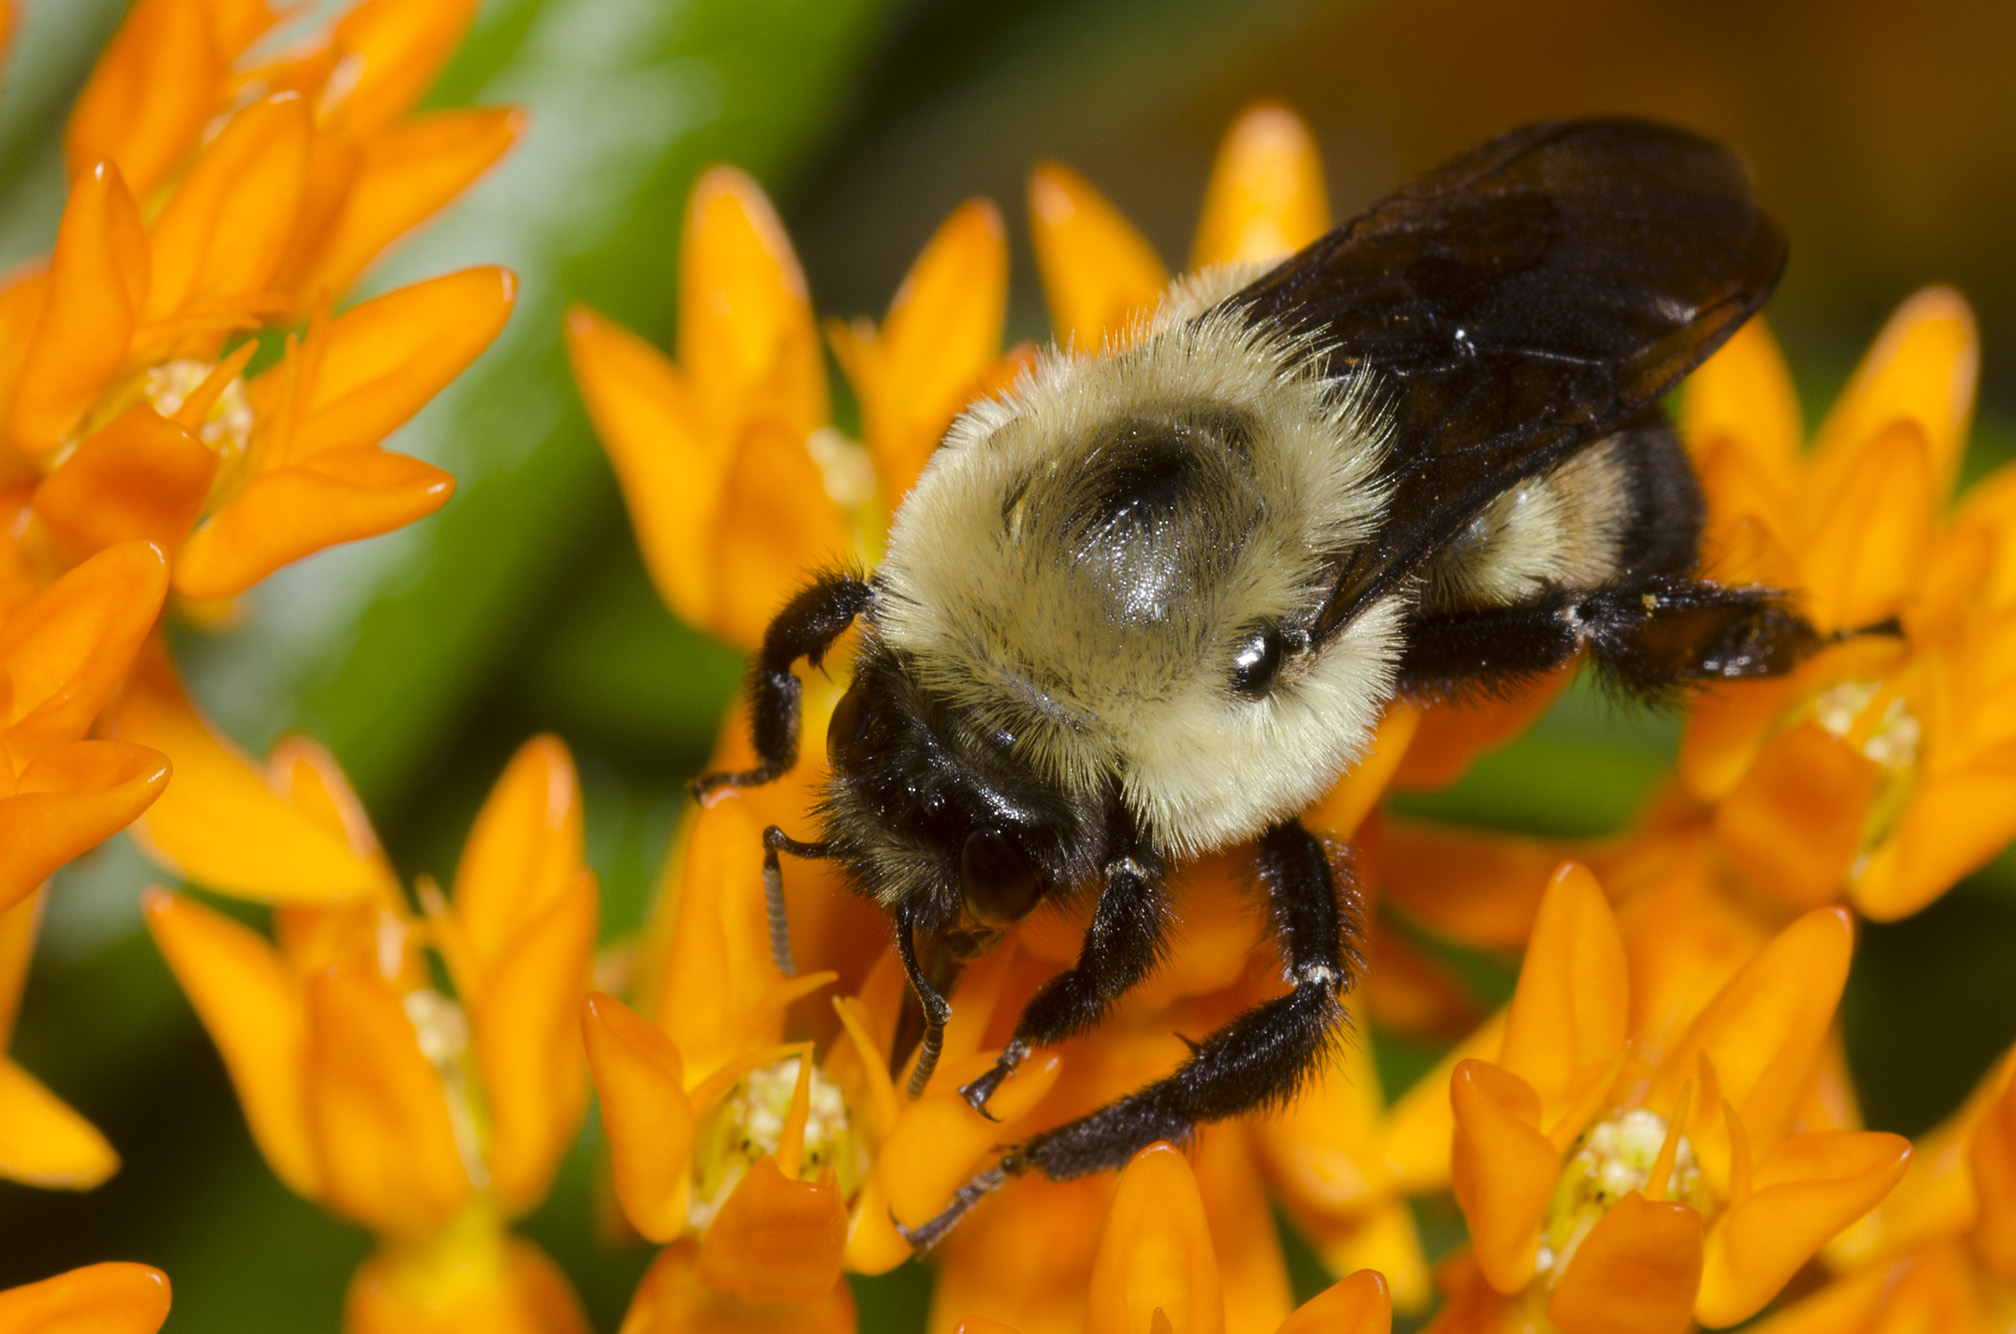 Looking down at the back of a bumble bee drinking nectar from the bright orange flowers of butterfly milkweed. The bumble bee is black and yellow with a single stripe of brown.